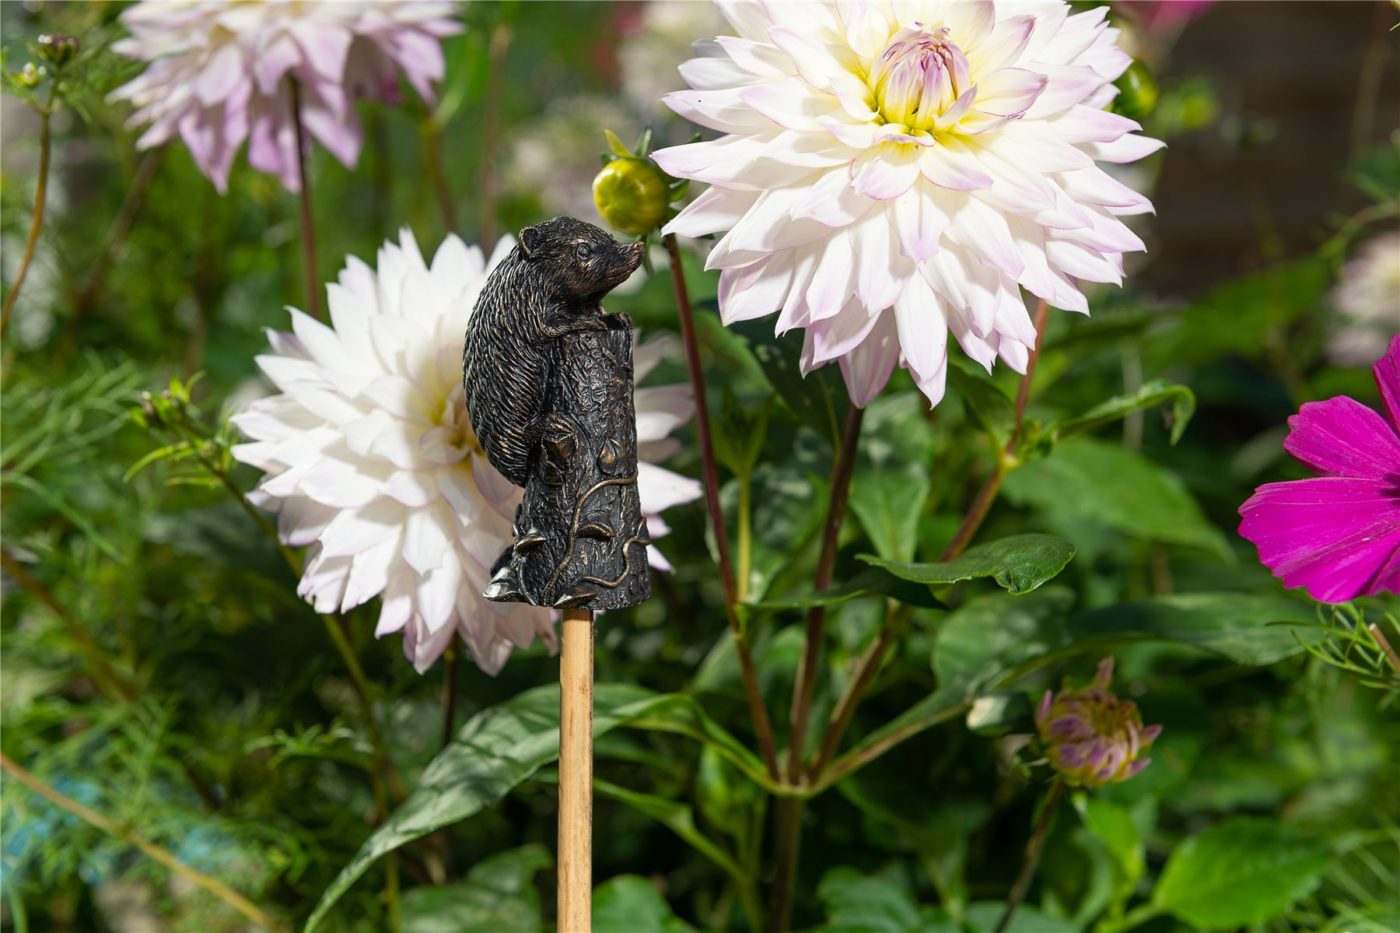 hedgehog topper on a stake in the garden surrounded by flowers